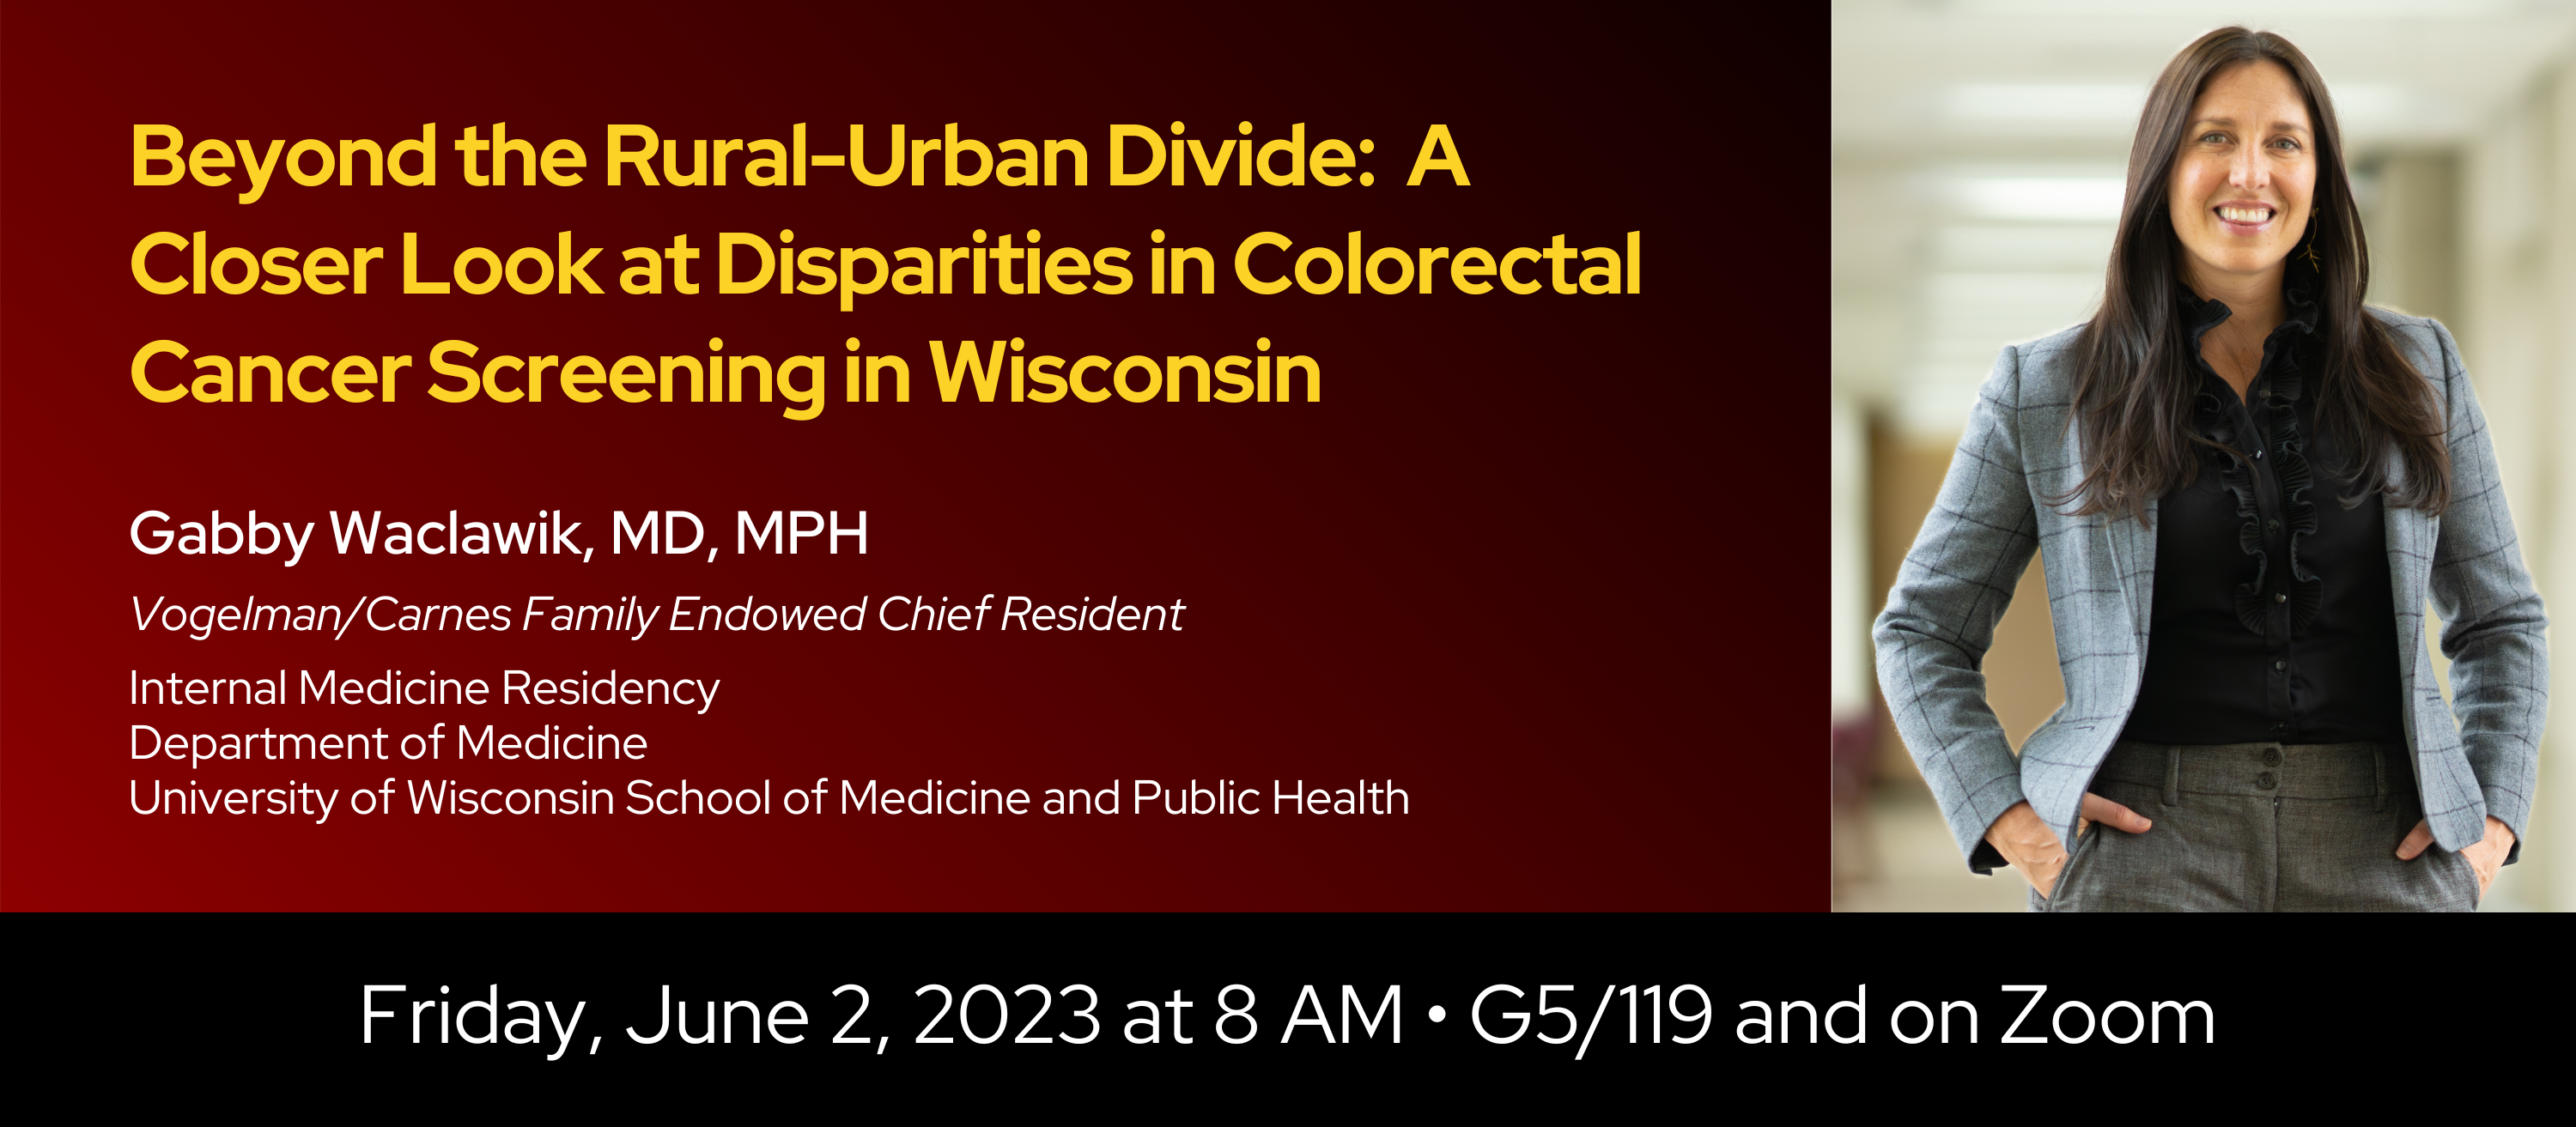 Beyond the Rural-Urban Divide: A Closer Look at Disparities in Colorectal Cancer Screening in Wisconsin